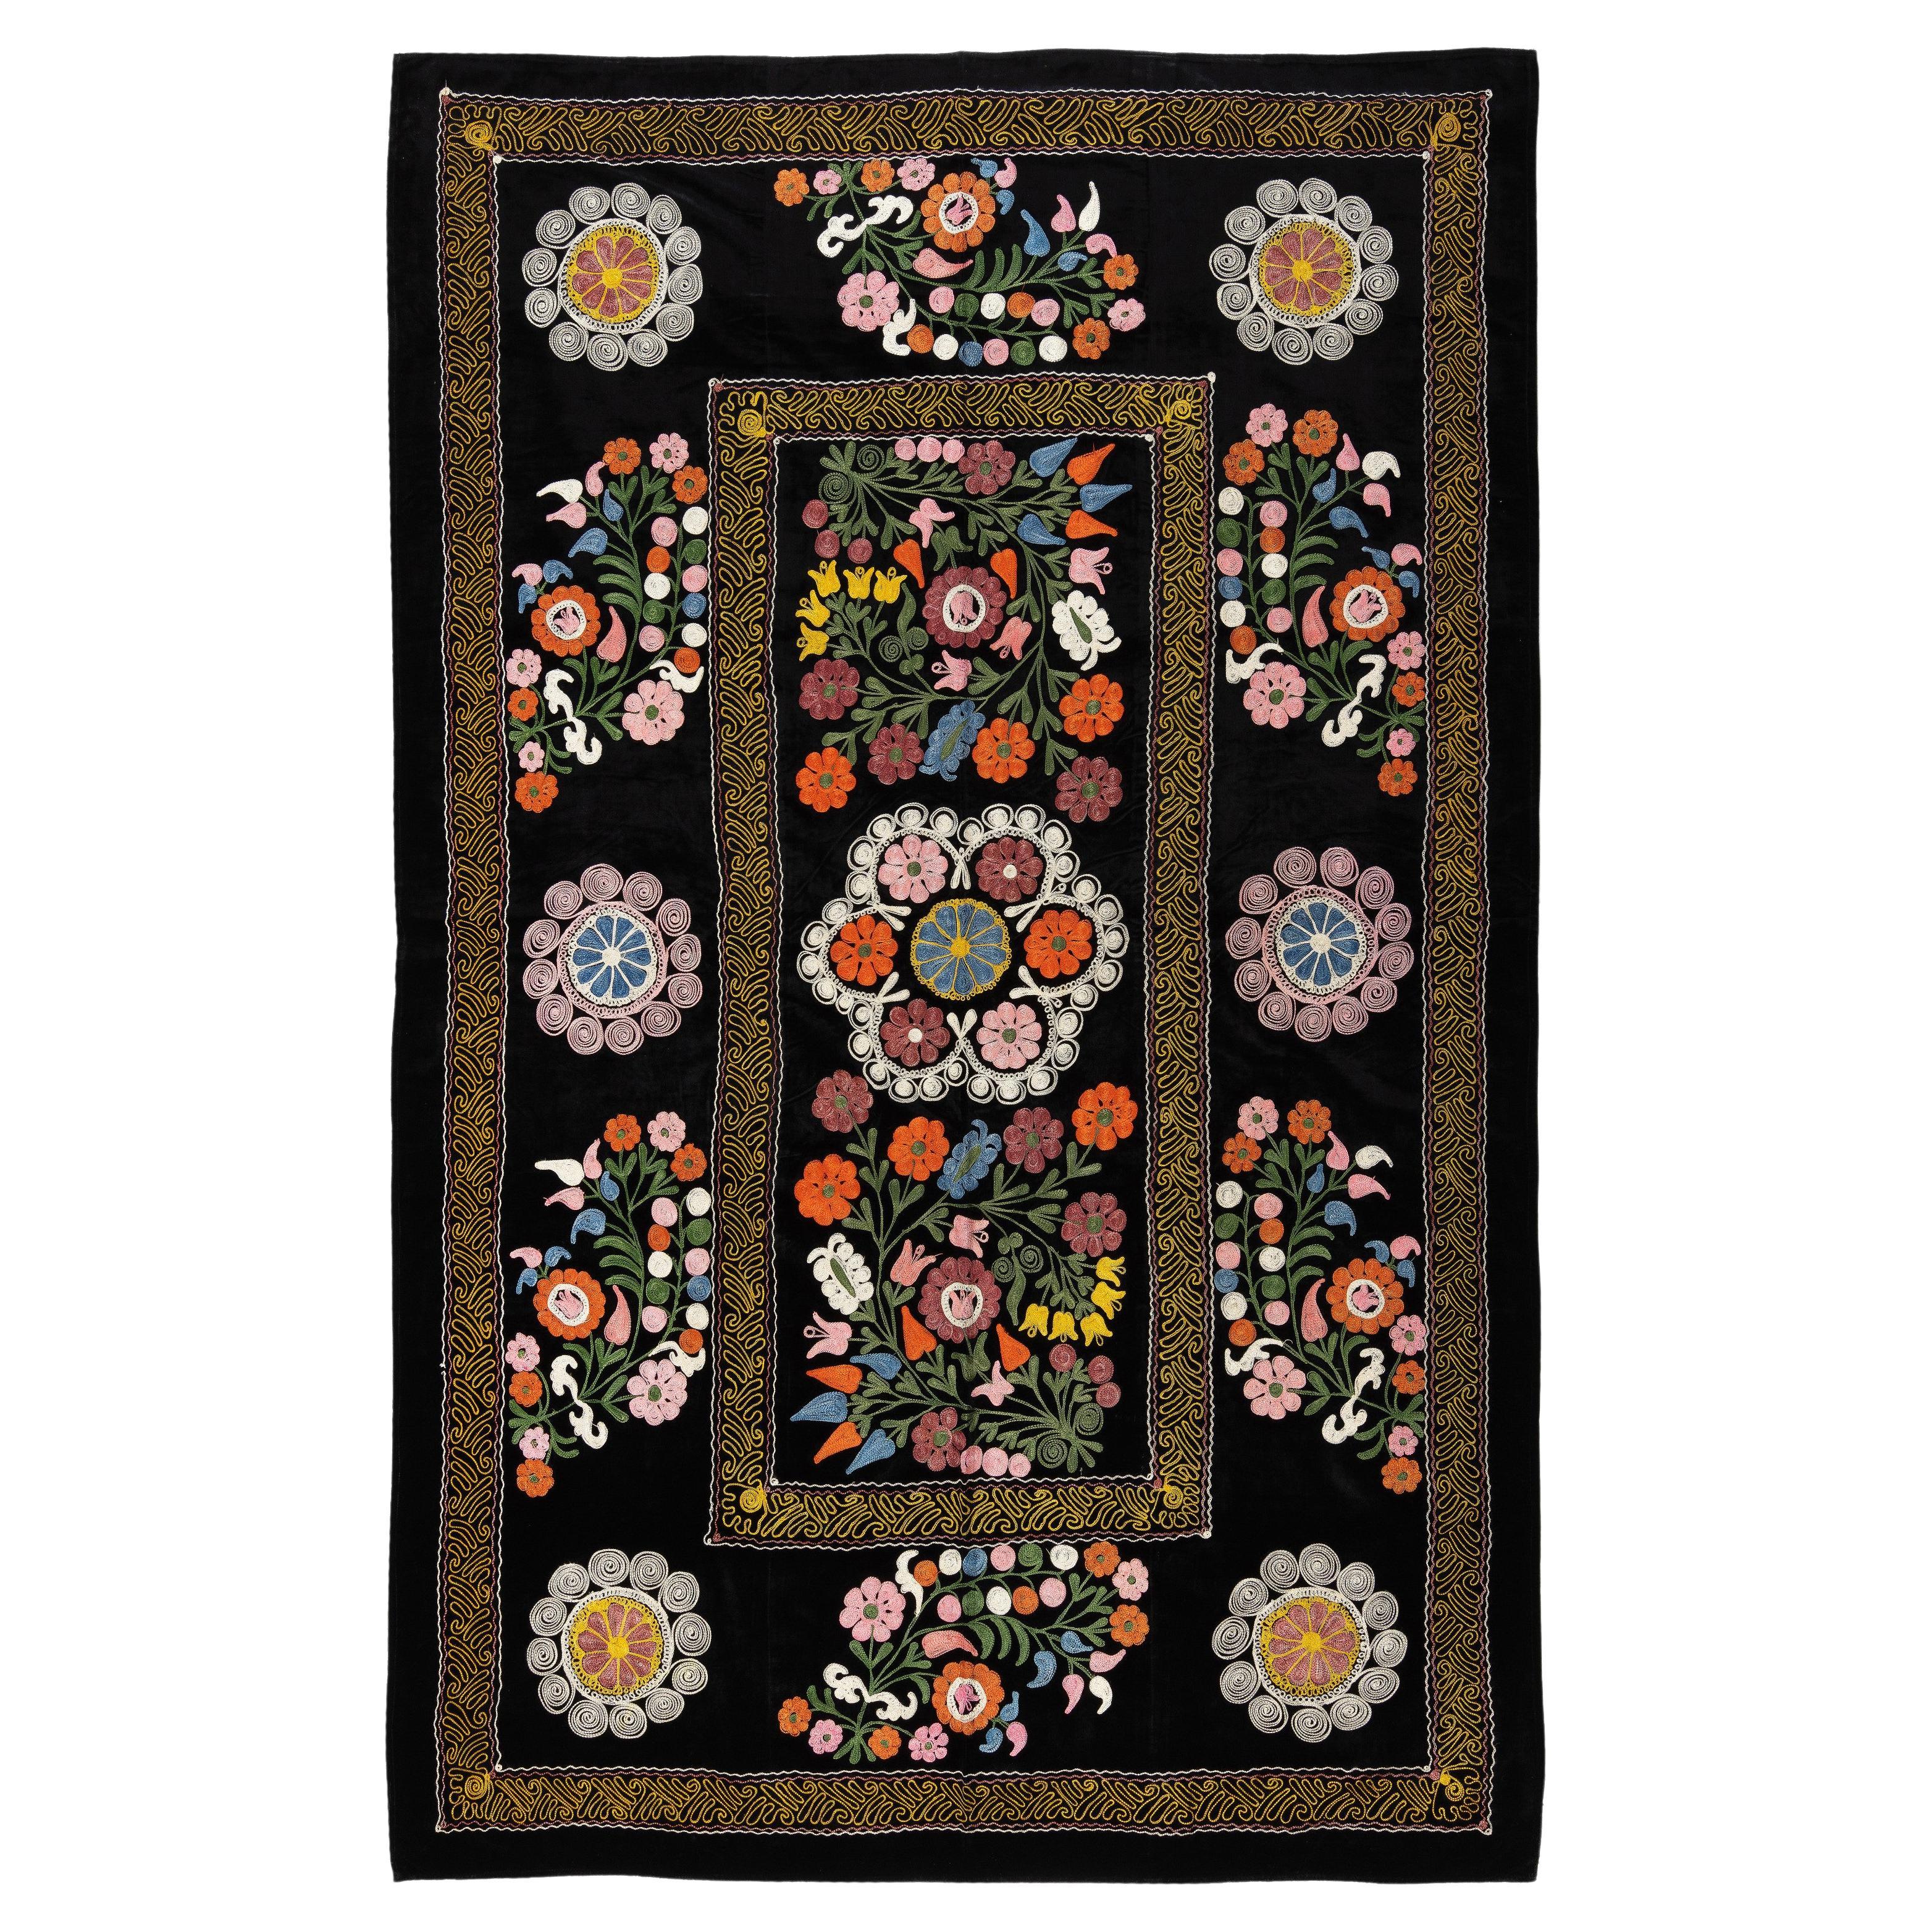 4.3x6.8 Ft Vintage Silk Embroidery Bed Cover, Asian Suzani Wall Hanging in Black For Sale